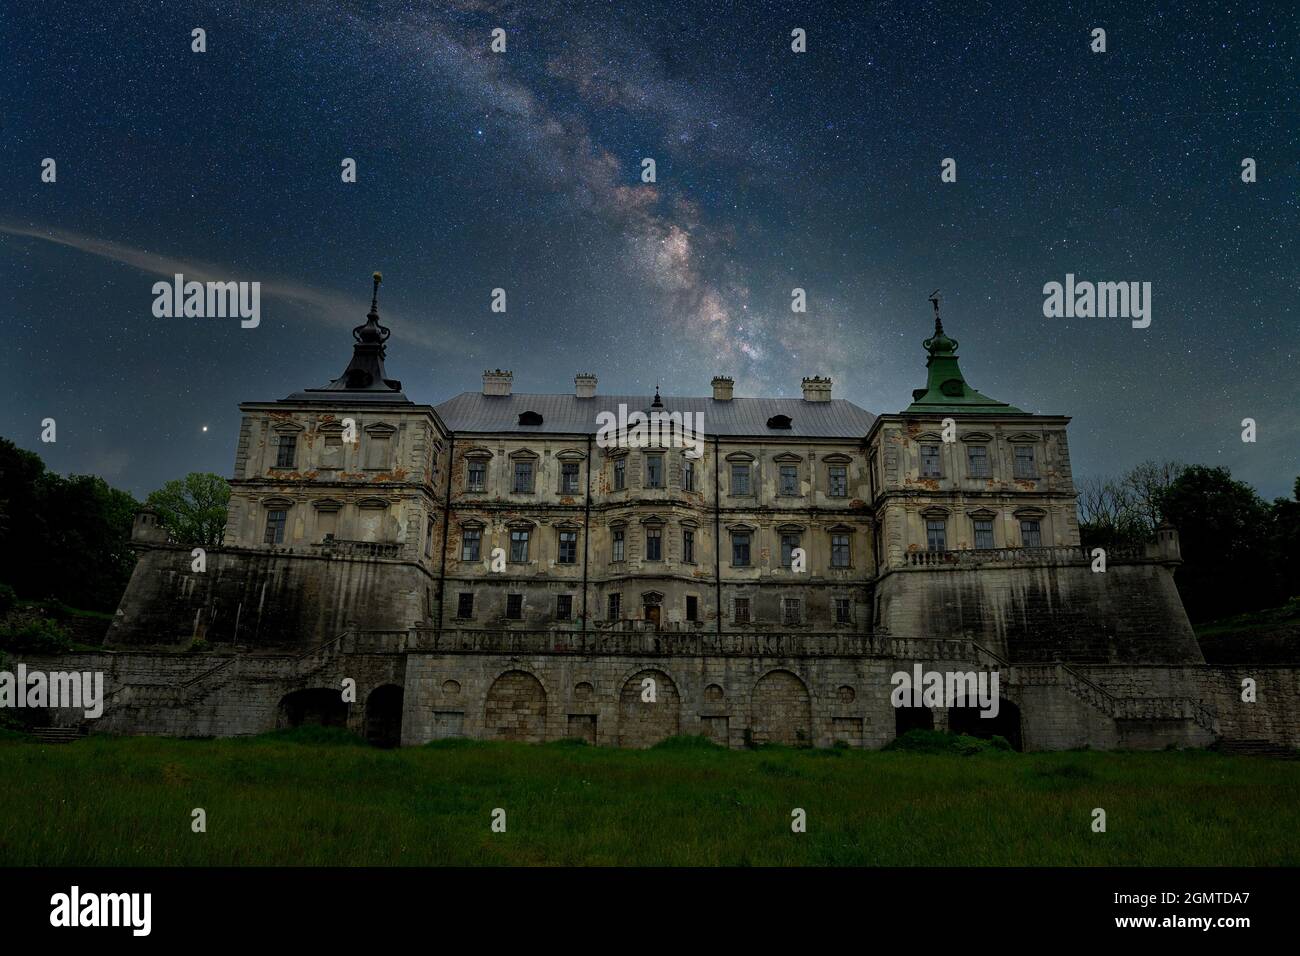 Stunning vibrant Milky Way composite image over landscape of Castle Stock Photo